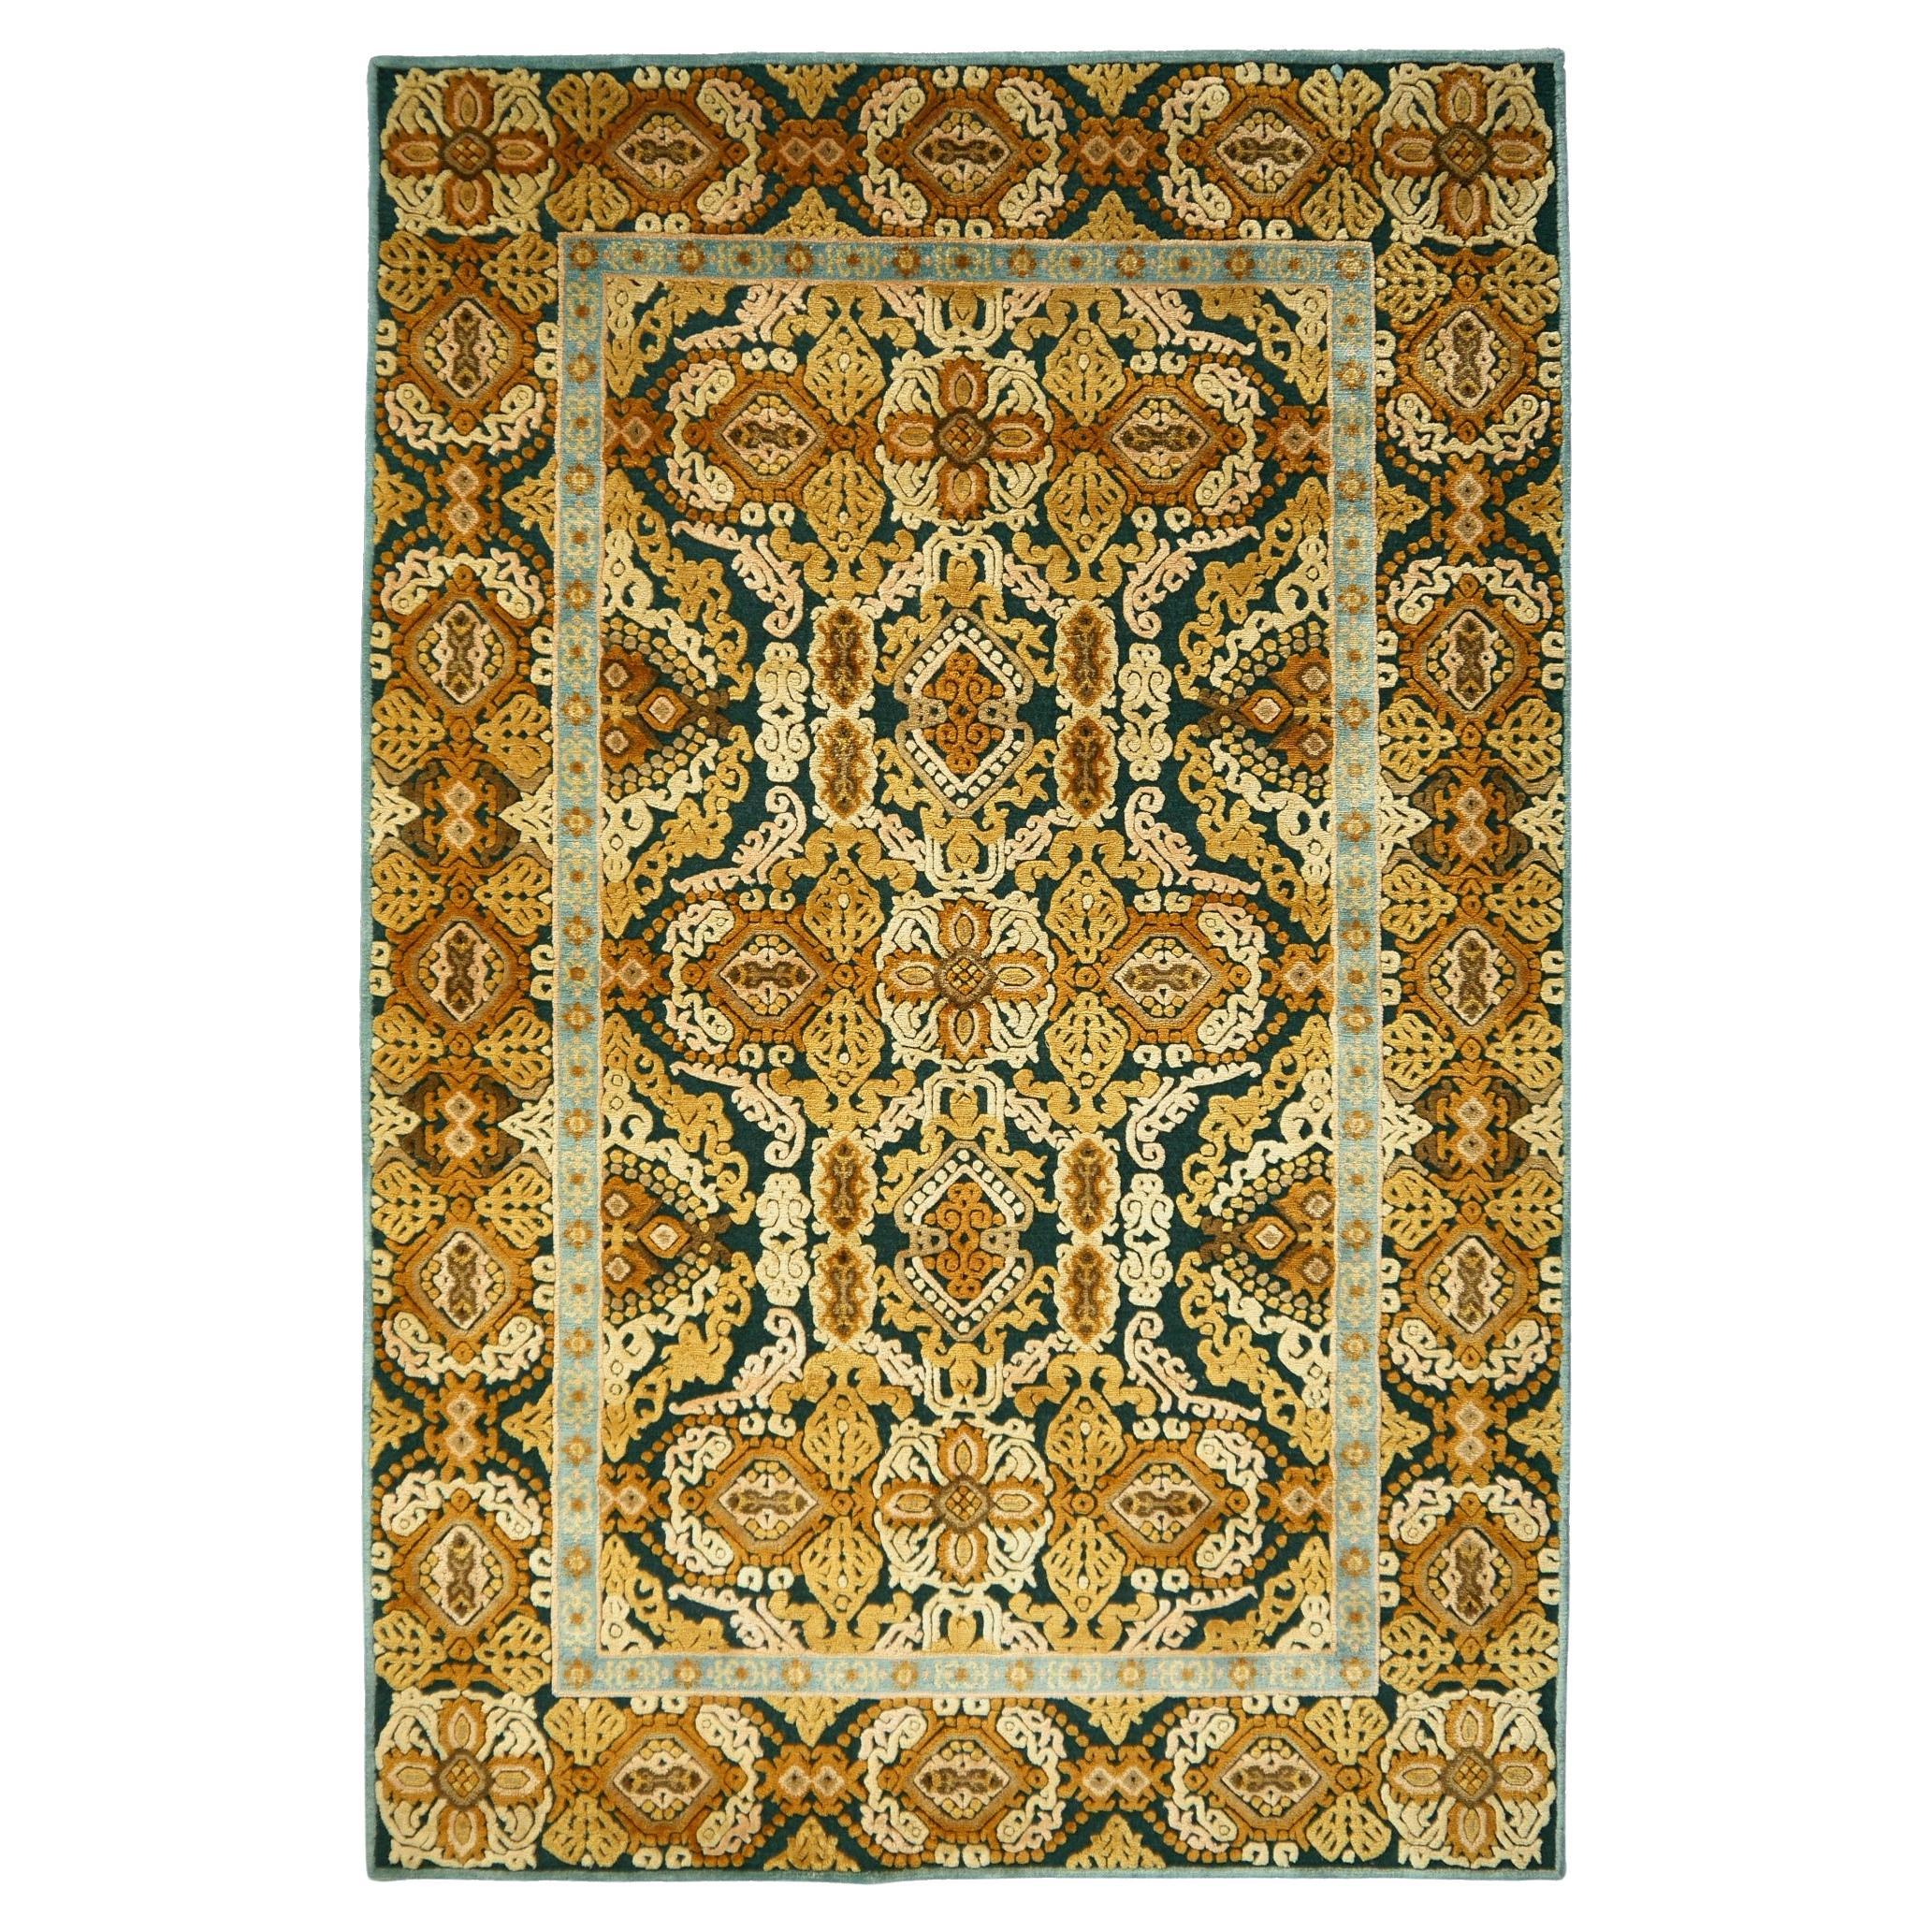 Djoharian Design Chinese and East Asian Rugs